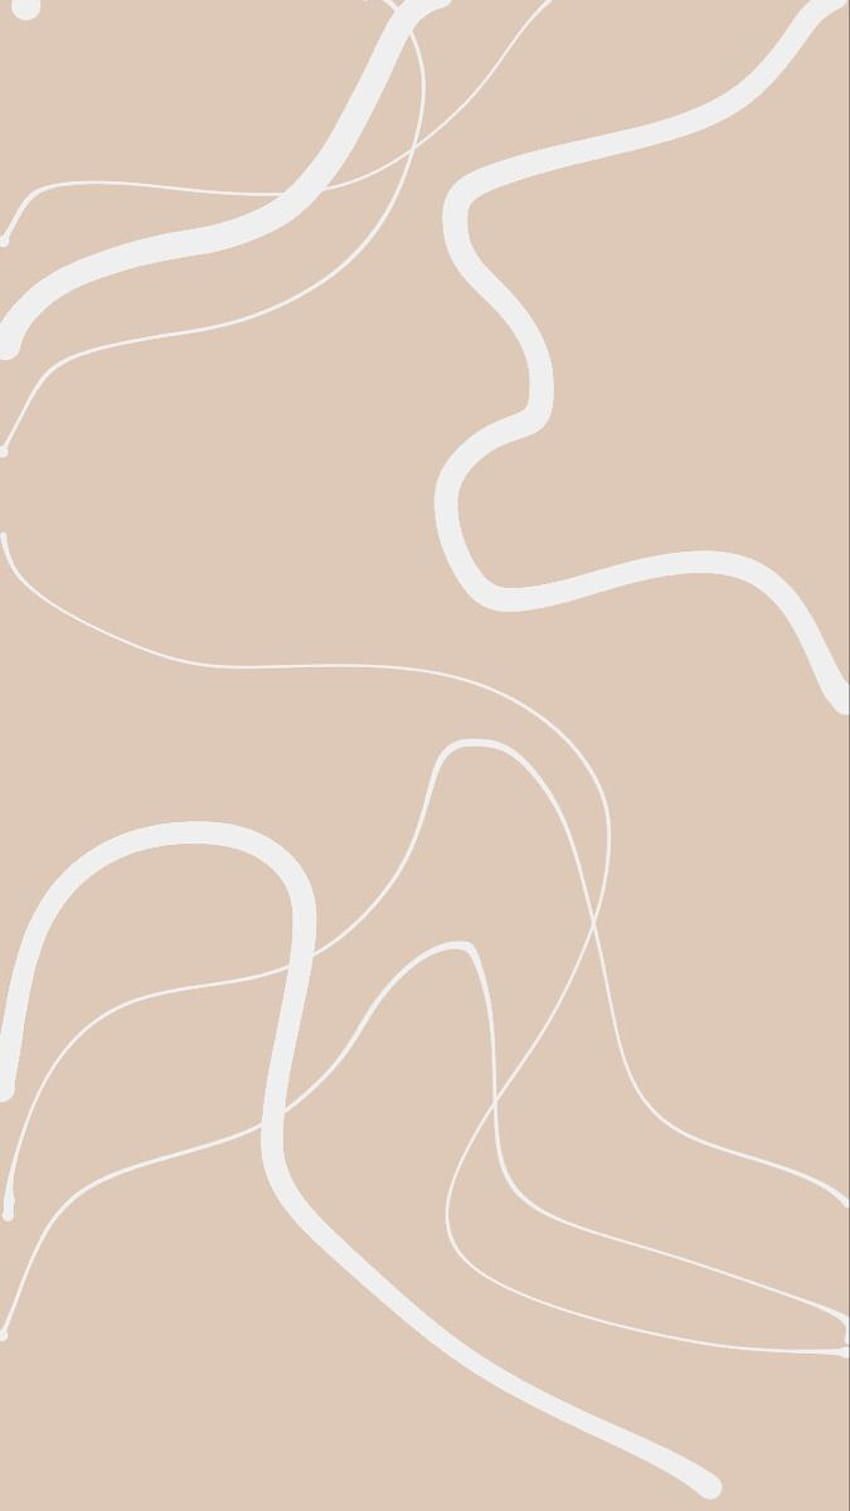 A phone background with a light brown background and white squiggly lines. - Minimalist beige, boho